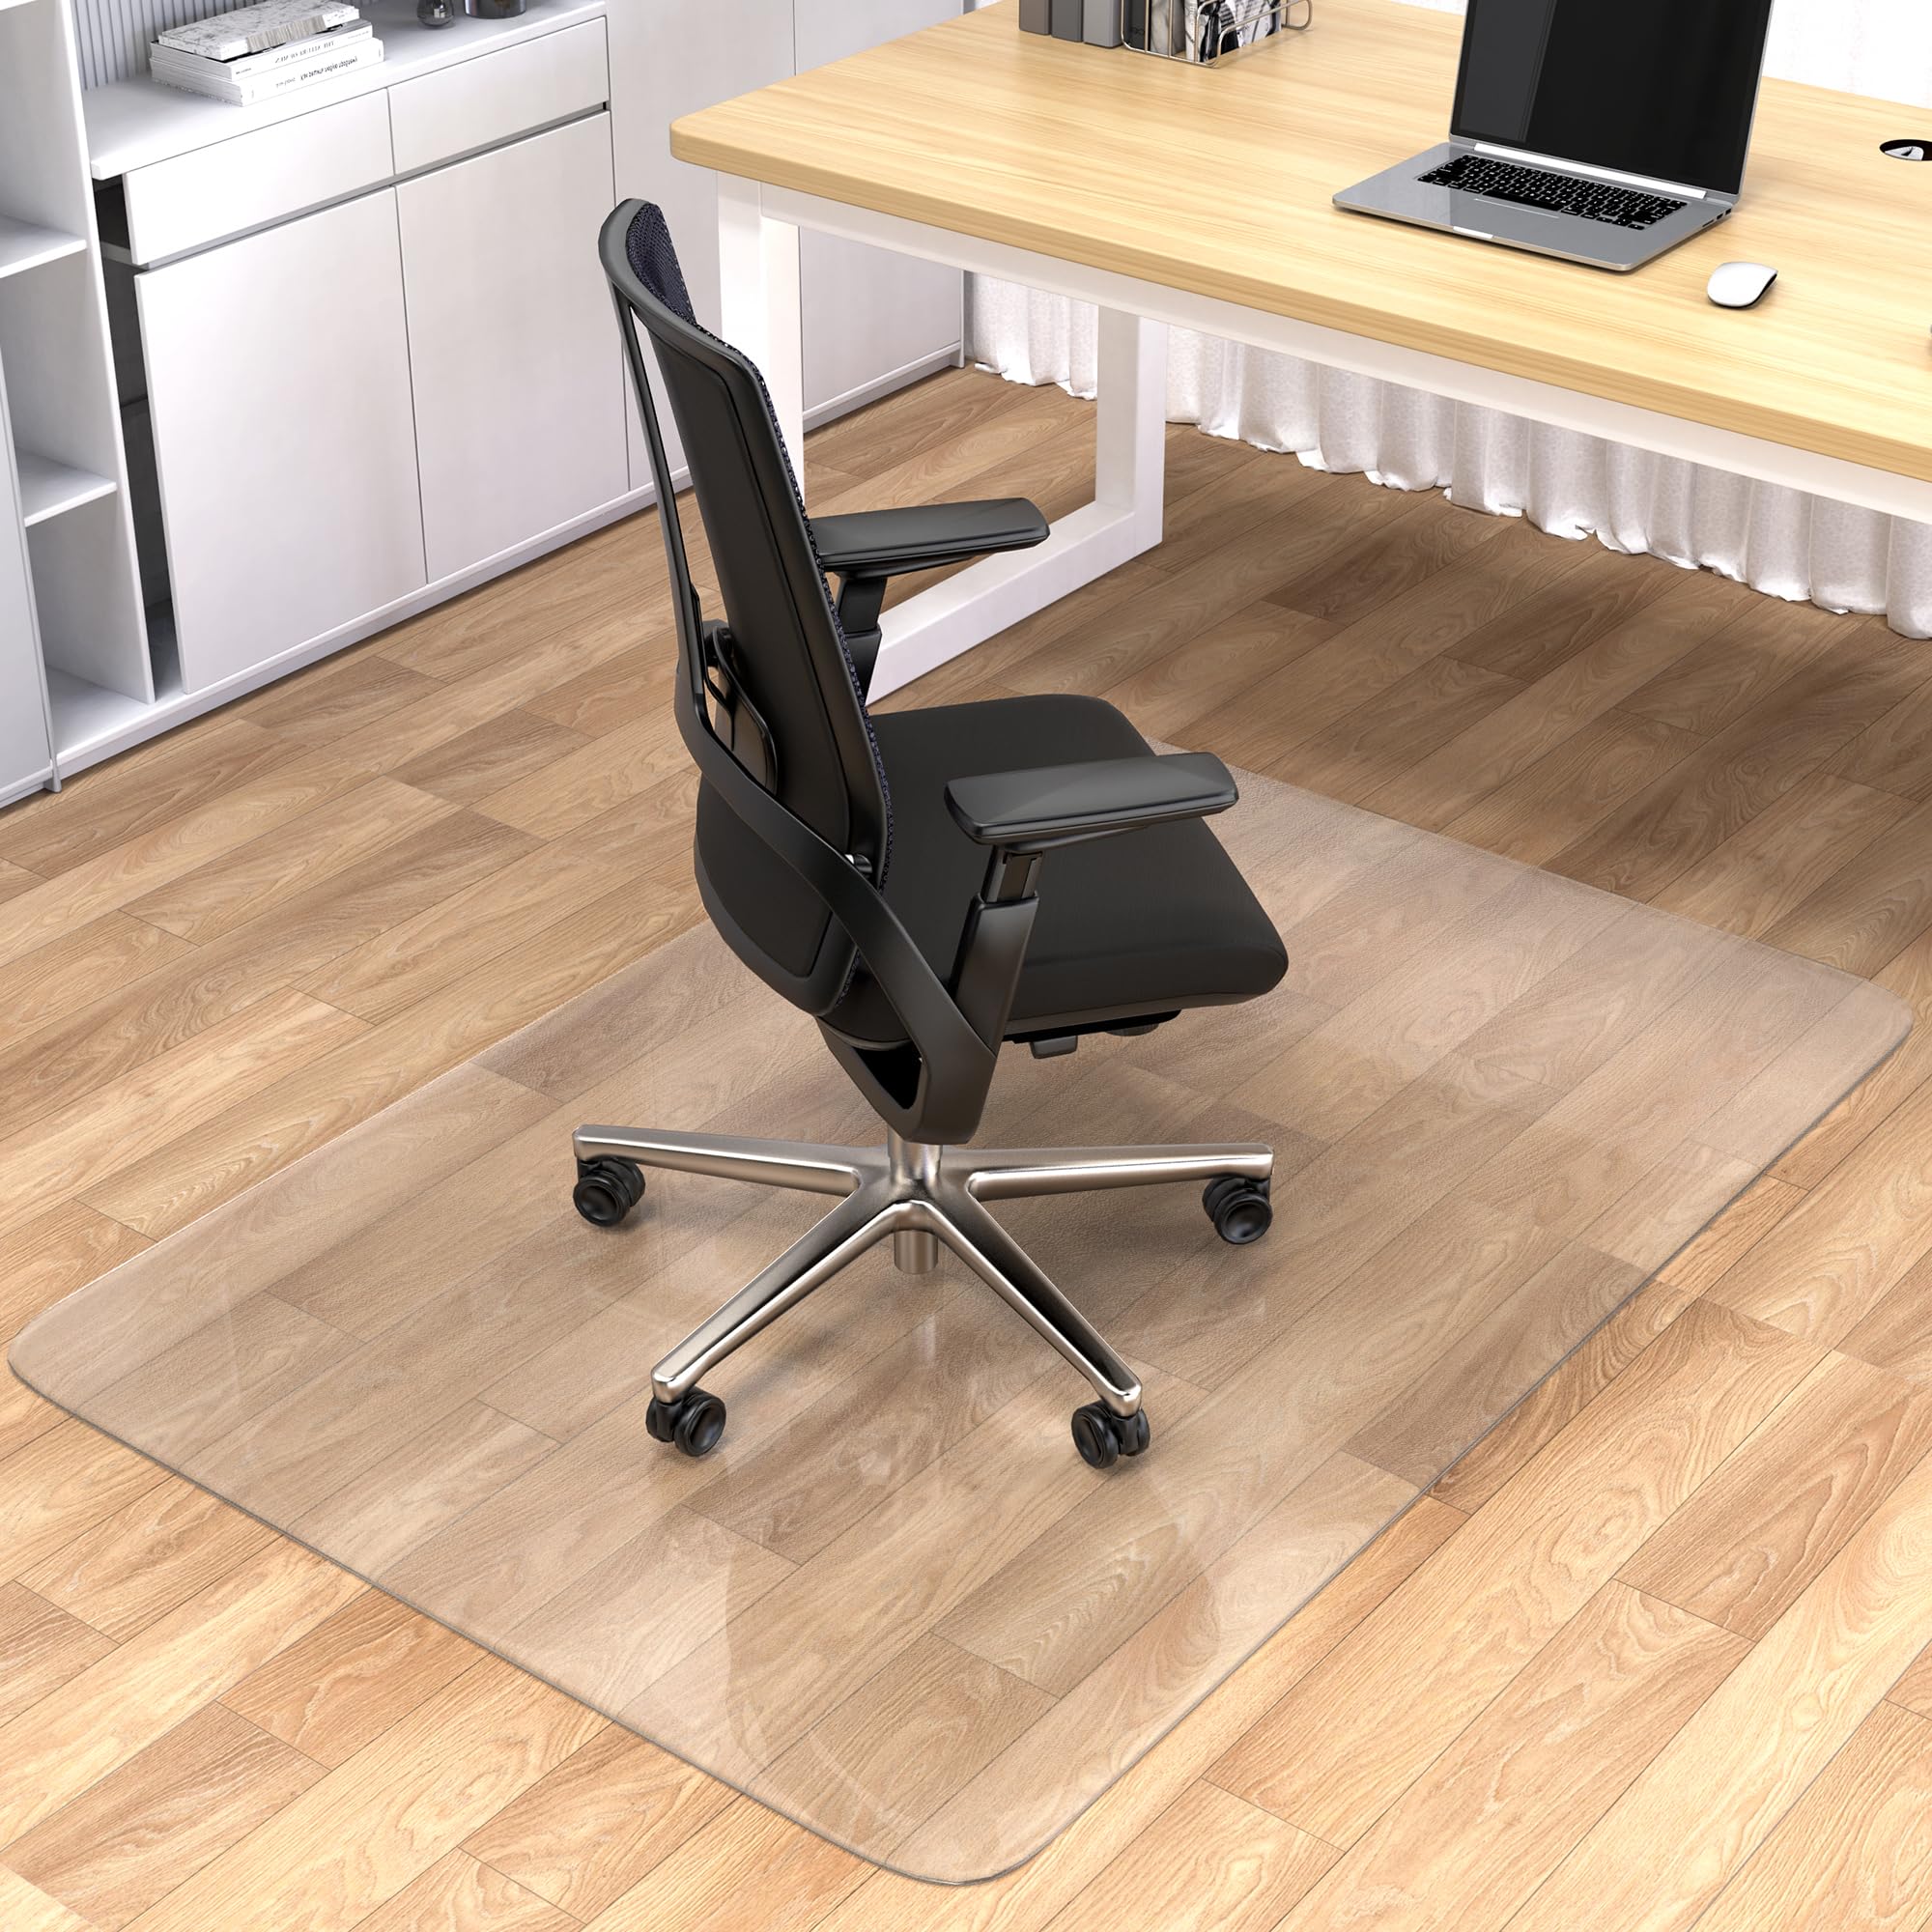 Large Office Chair Mat for Hardwood Floors - 48"×60" Anti-Slip Desk Chair Mat - Heavy Duty Floor Protector for Home or Office - Easy Clean and Flat Without Curling